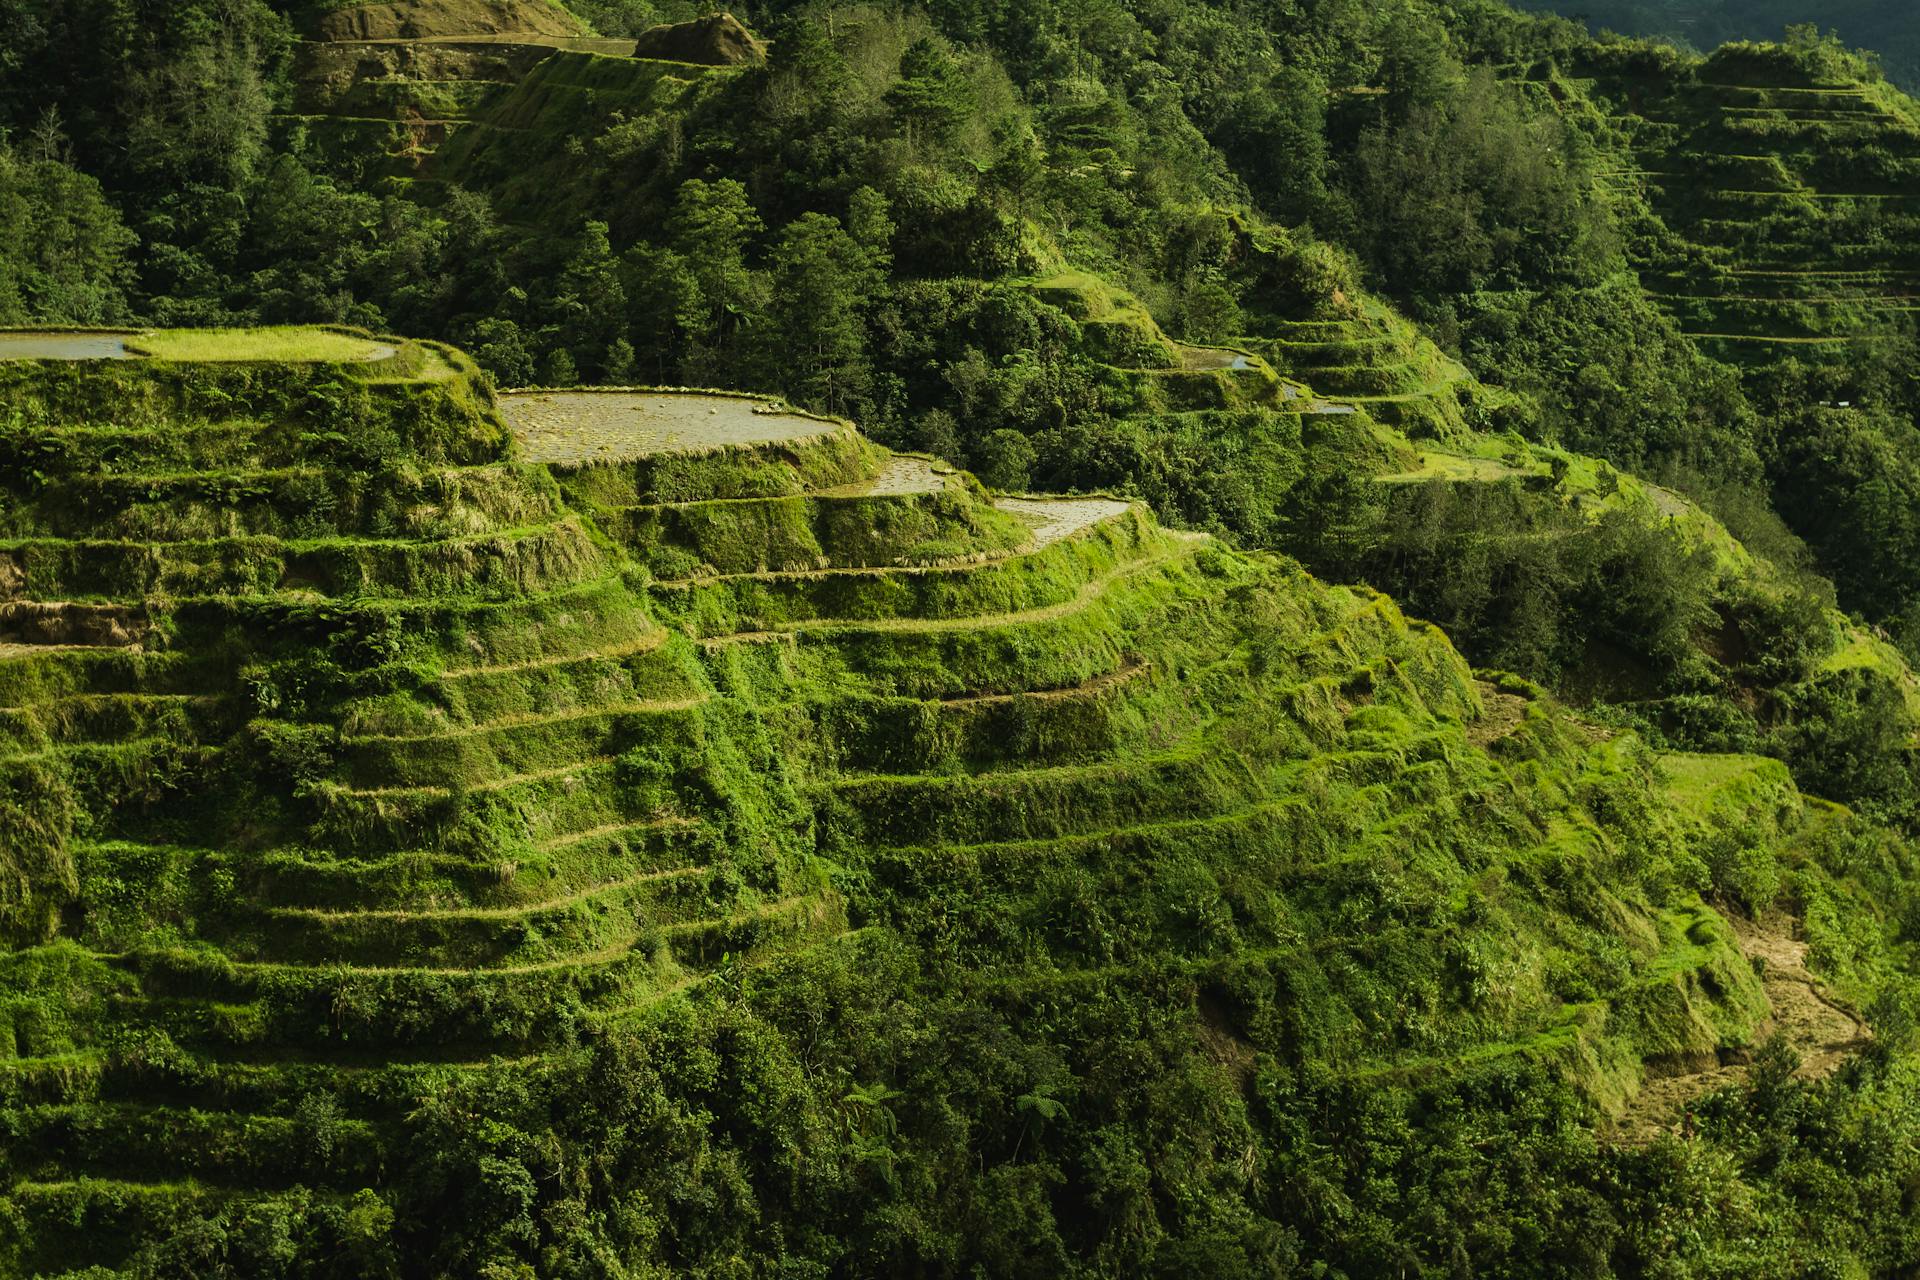 Scenic Photo Of Rice Terraces During Daytime